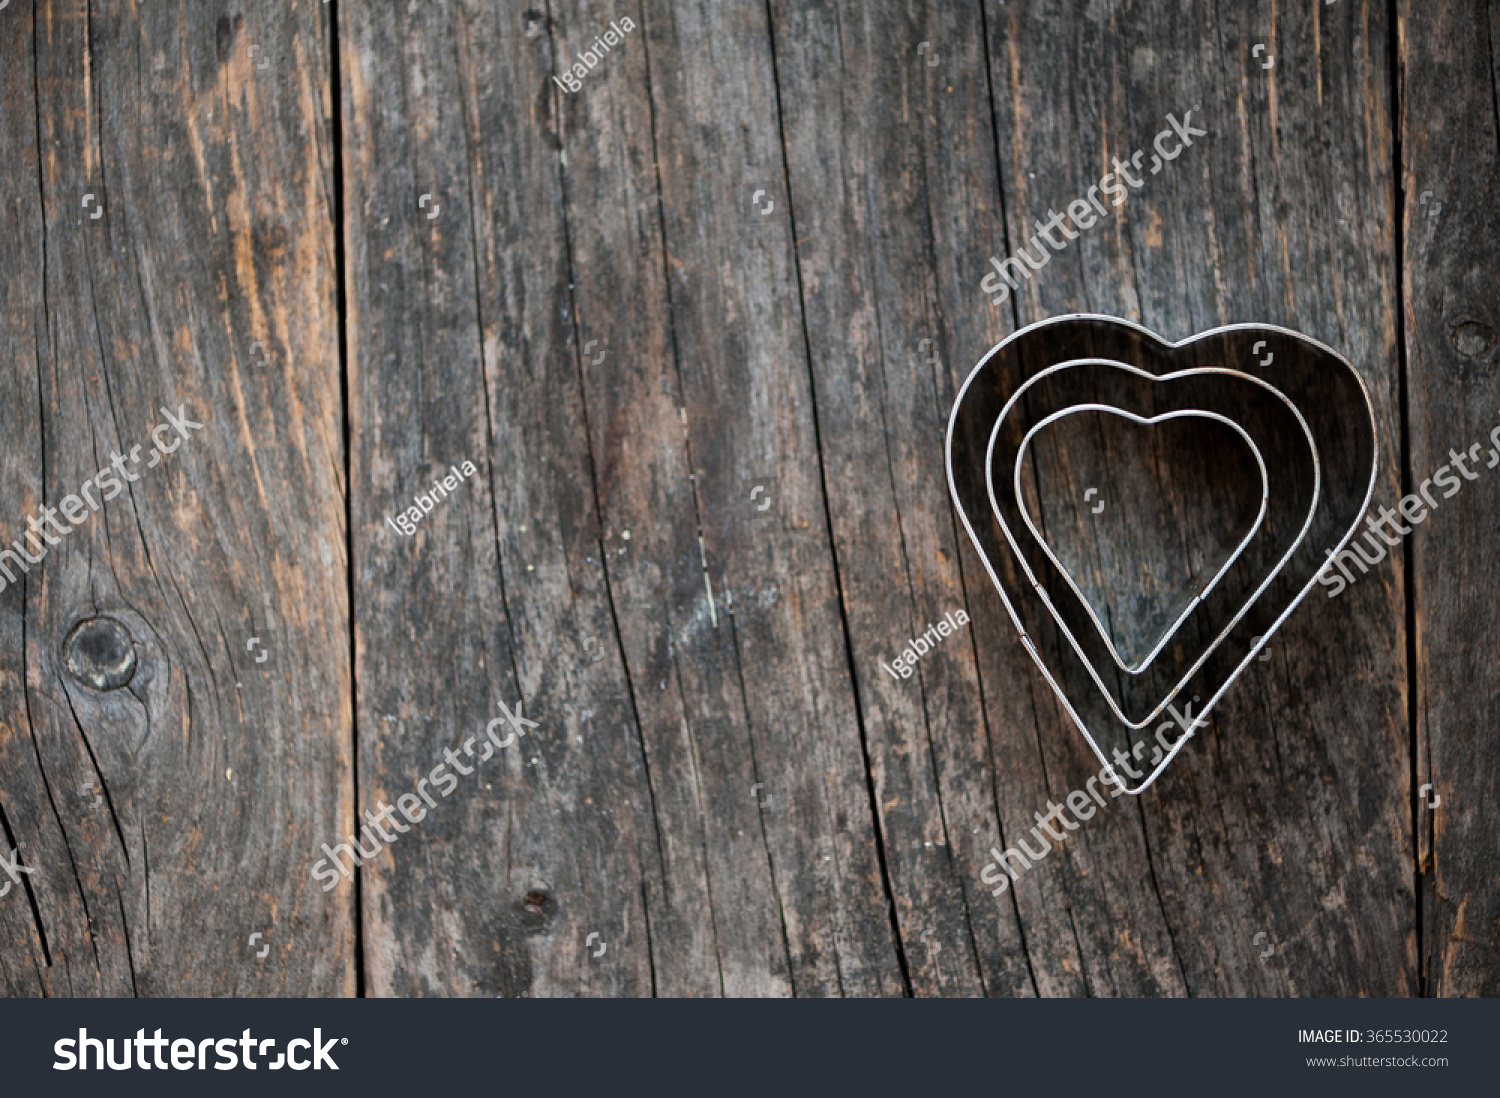 Heart shaped cookie cutter on a wooden background #365530022